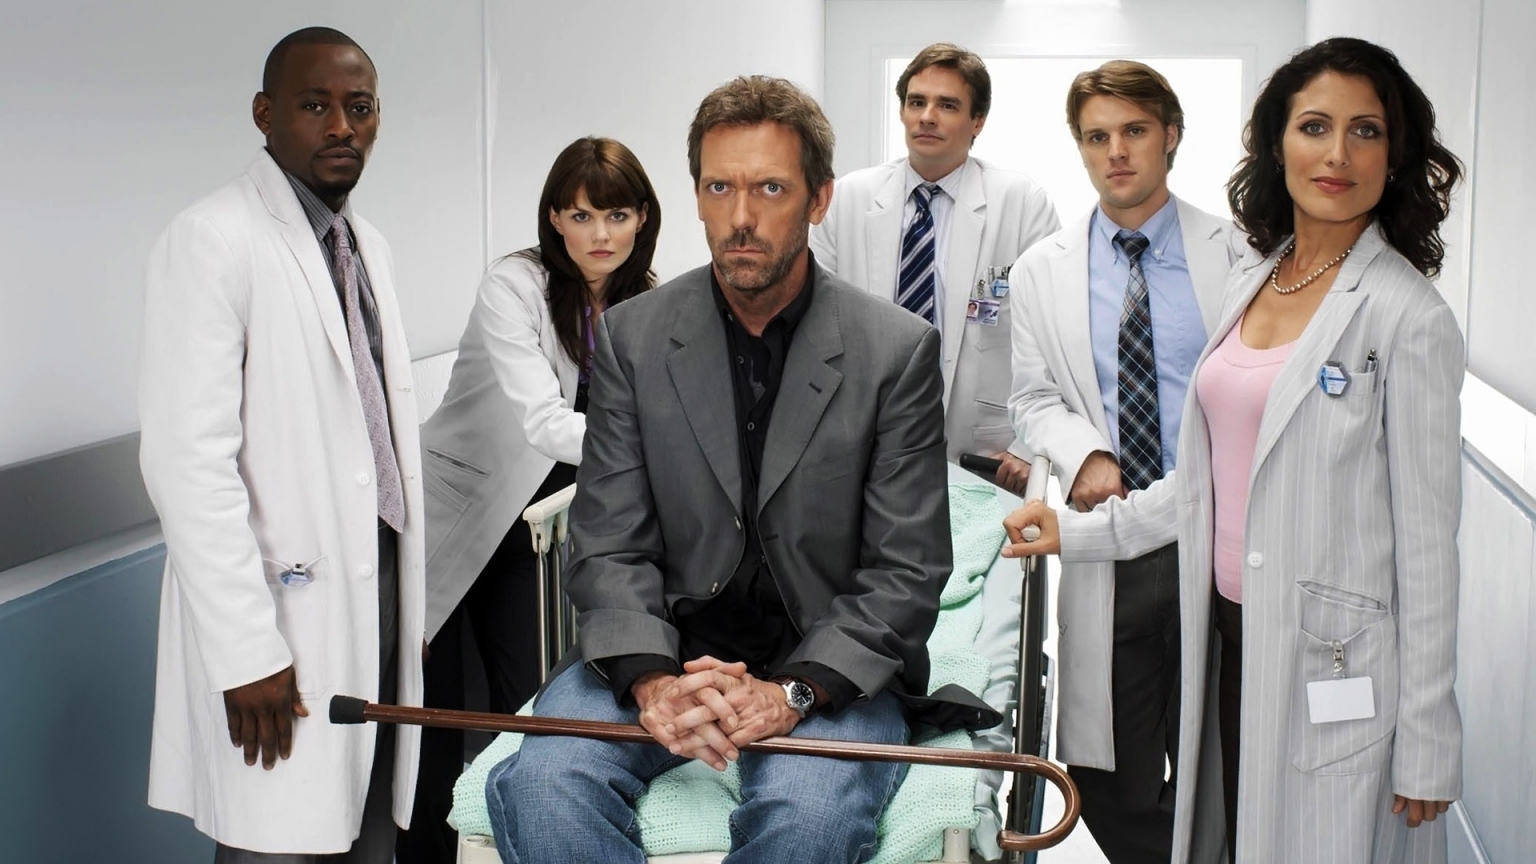 House MD Characters for 1536 x 864 HDTV resolution